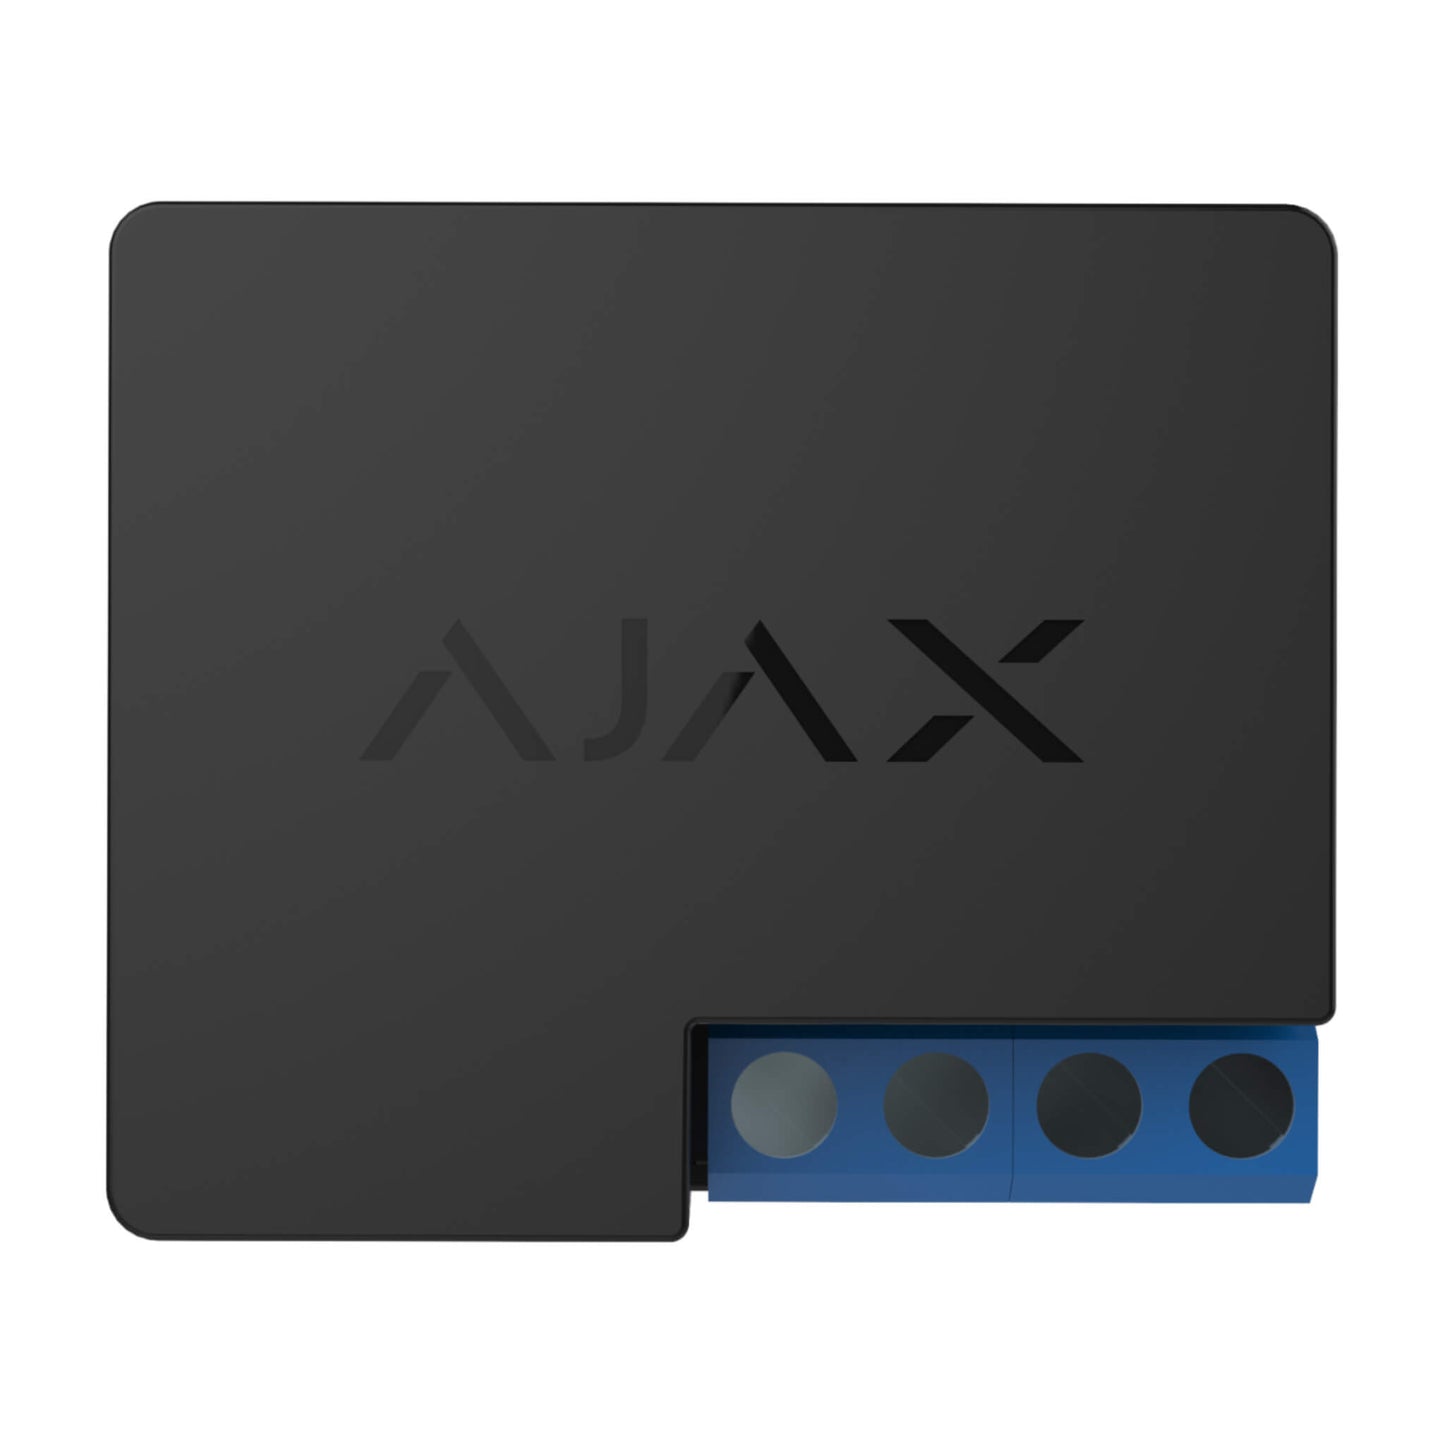 Black Ajax WallSwitch a device used to control 230volt appiances in youre home or business, connection is normally open or normally closed. The device is 39 × 33 × 18 mm in size , 30grams in weight. is Wall mountable using DIN holder. Front view of device for indoor installation only.